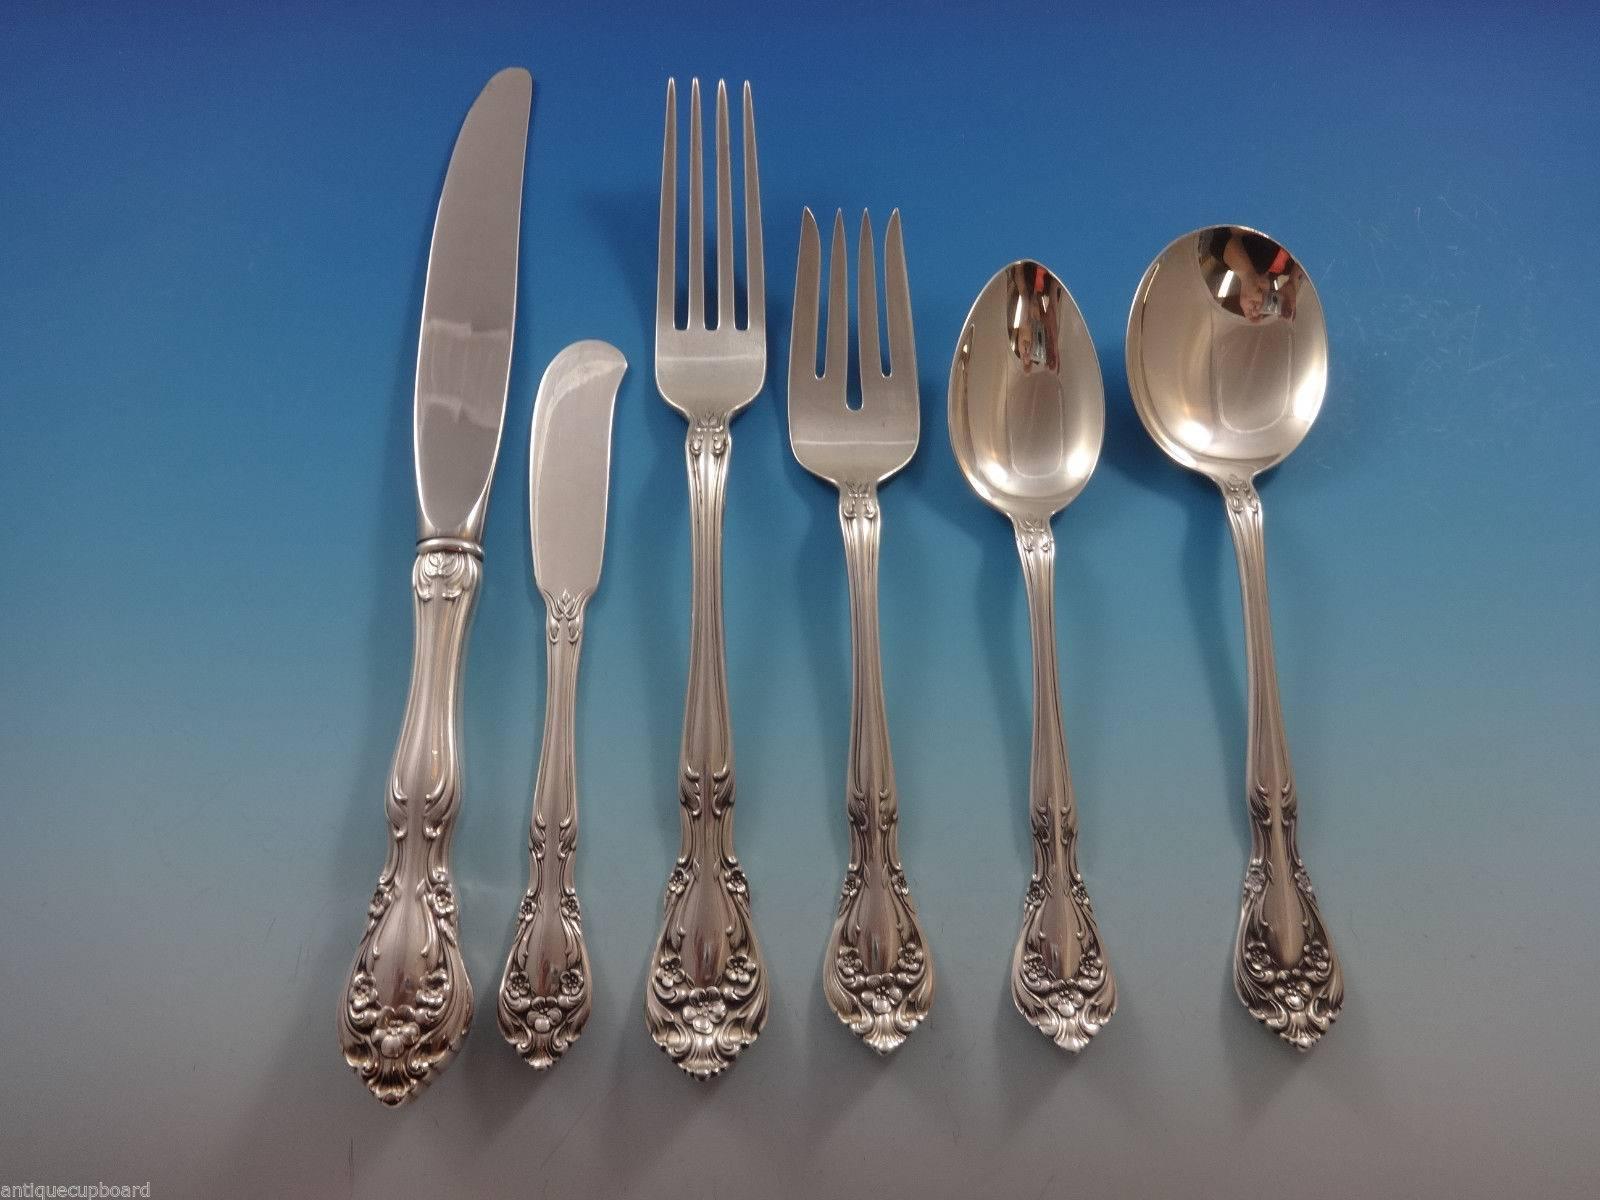 Stunning Chateau Rose by Alvin sterling silver flatware set of 53 pieces. This set includes:

Eight knives, 8 7/8